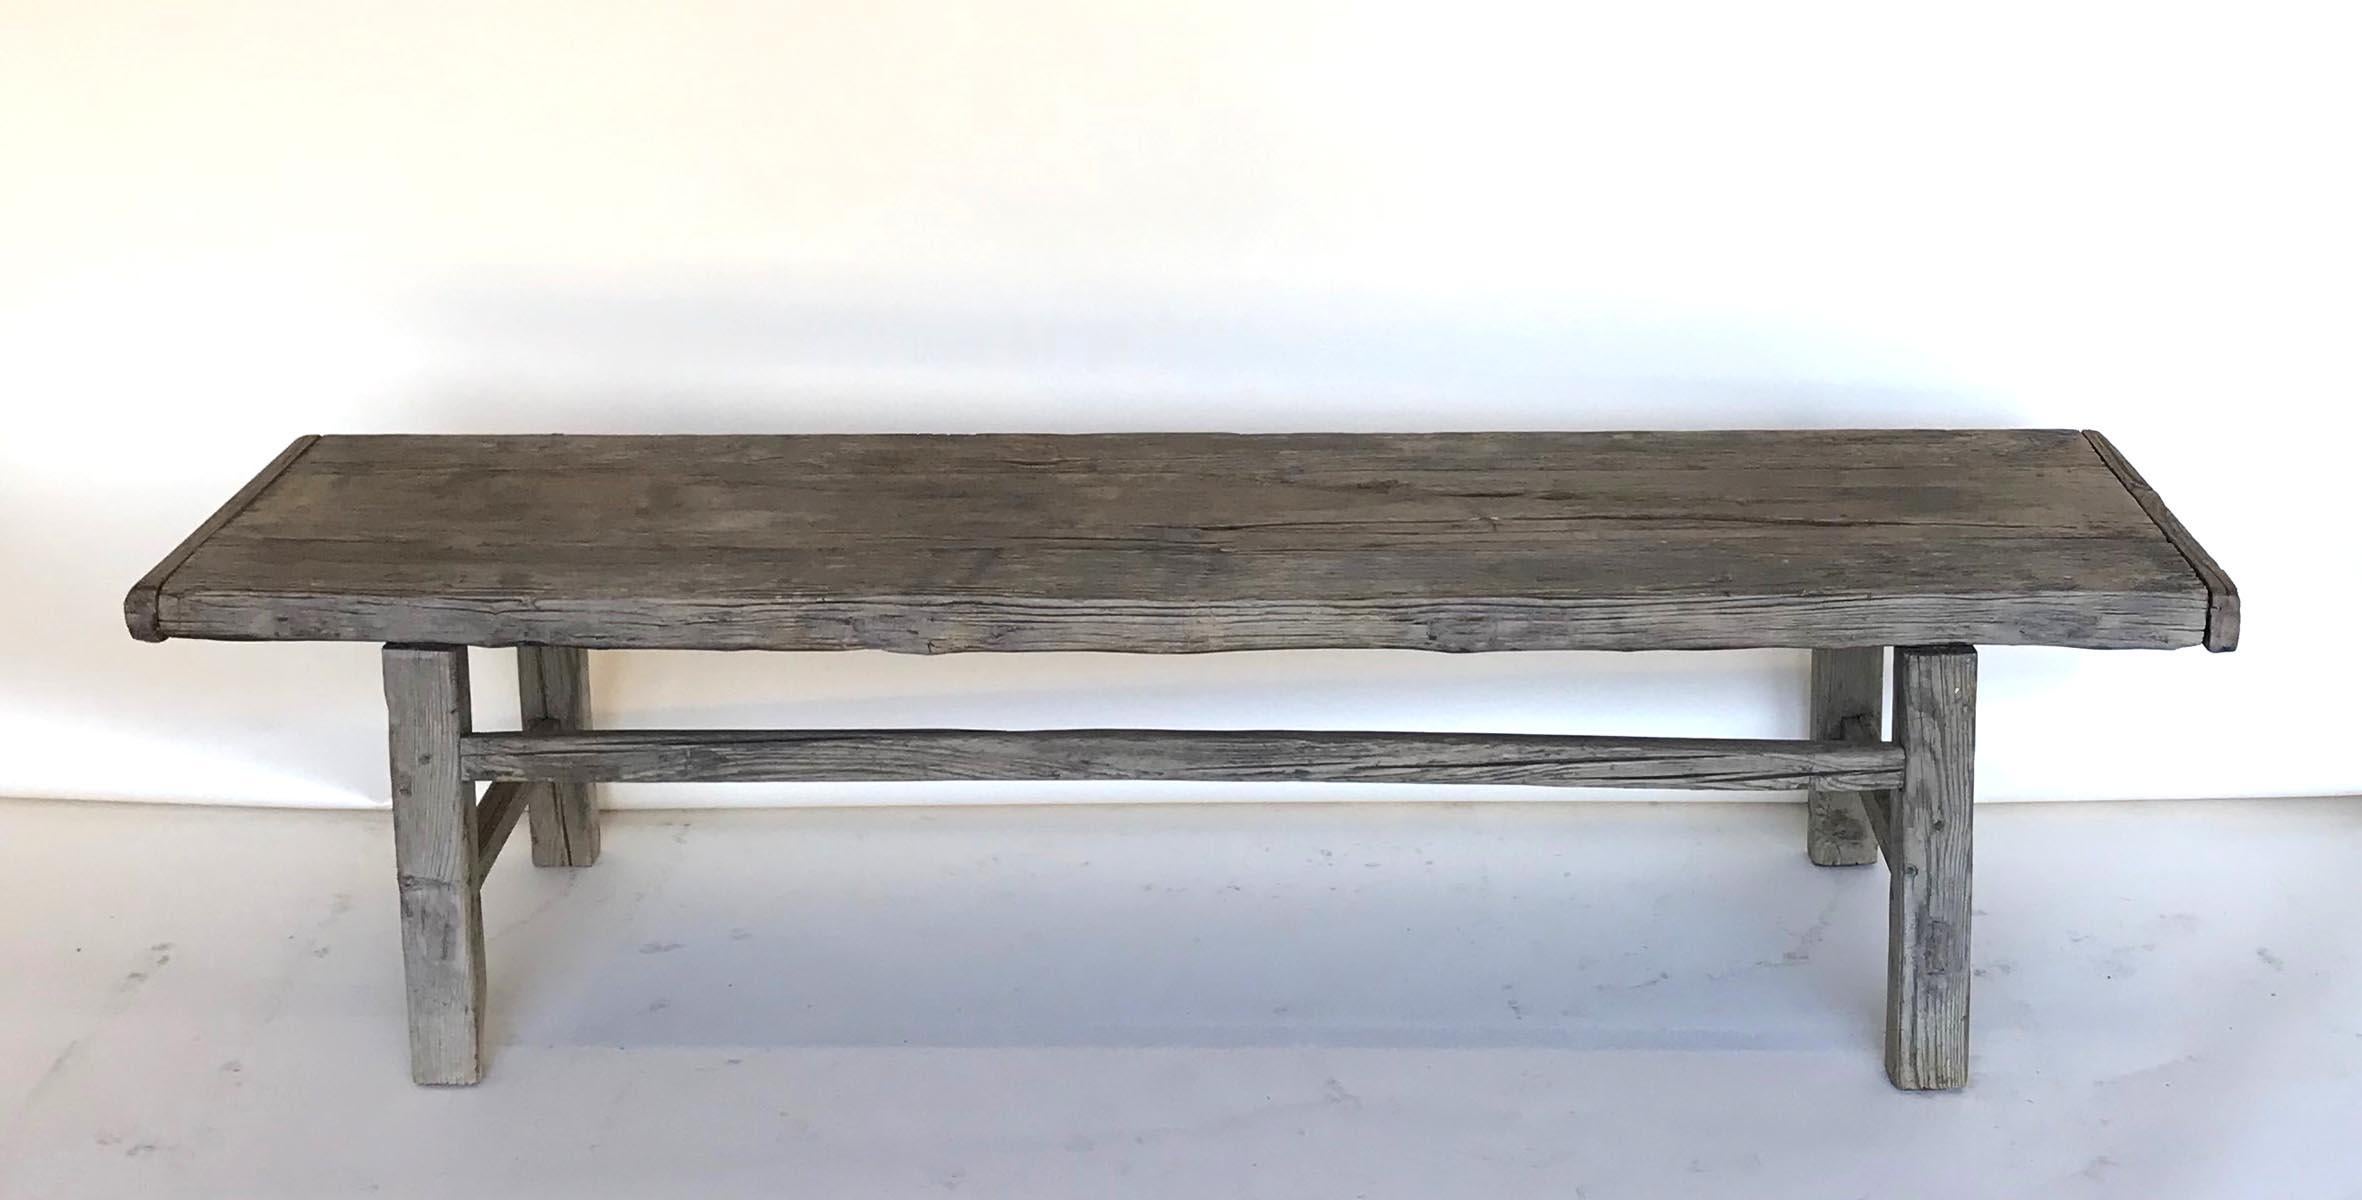 Vintage elm bench with stretchers. Mortise and Tenon construction. Lovely naturally distressed, smooth patina on wood. Can work as a bench, low console or coffee table.